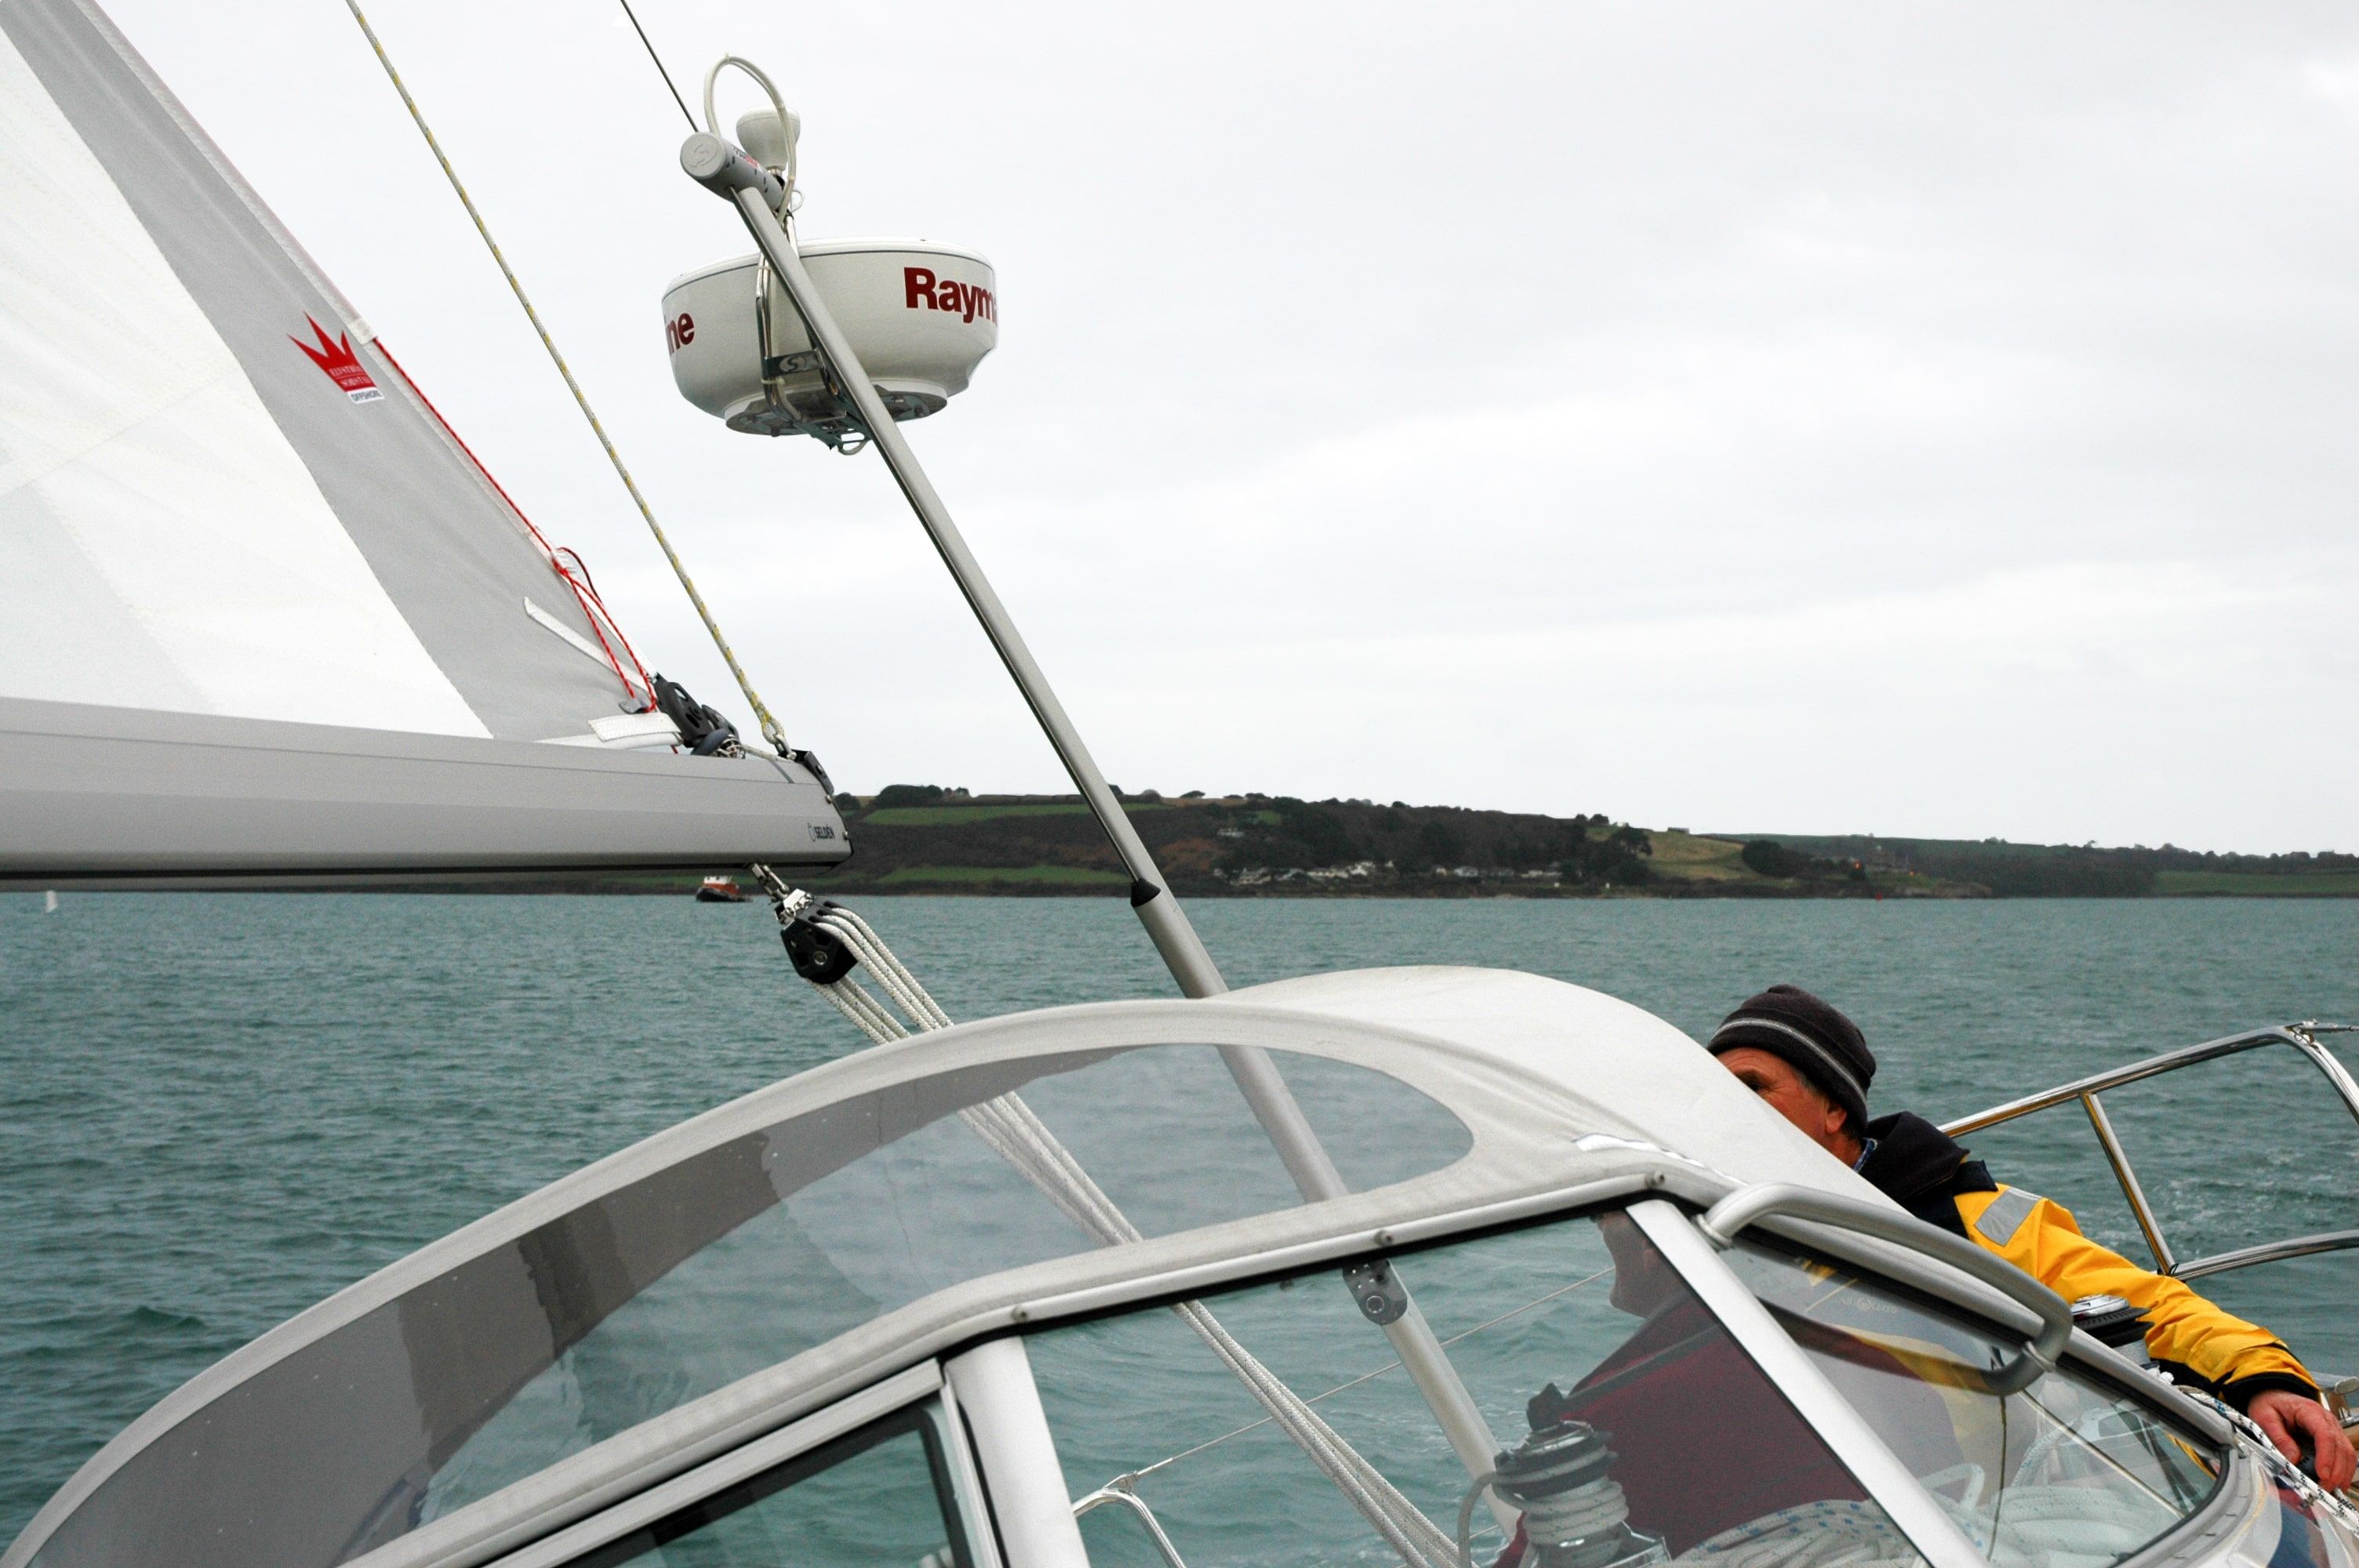 The 5 best places to mount radar on your sailing yacht